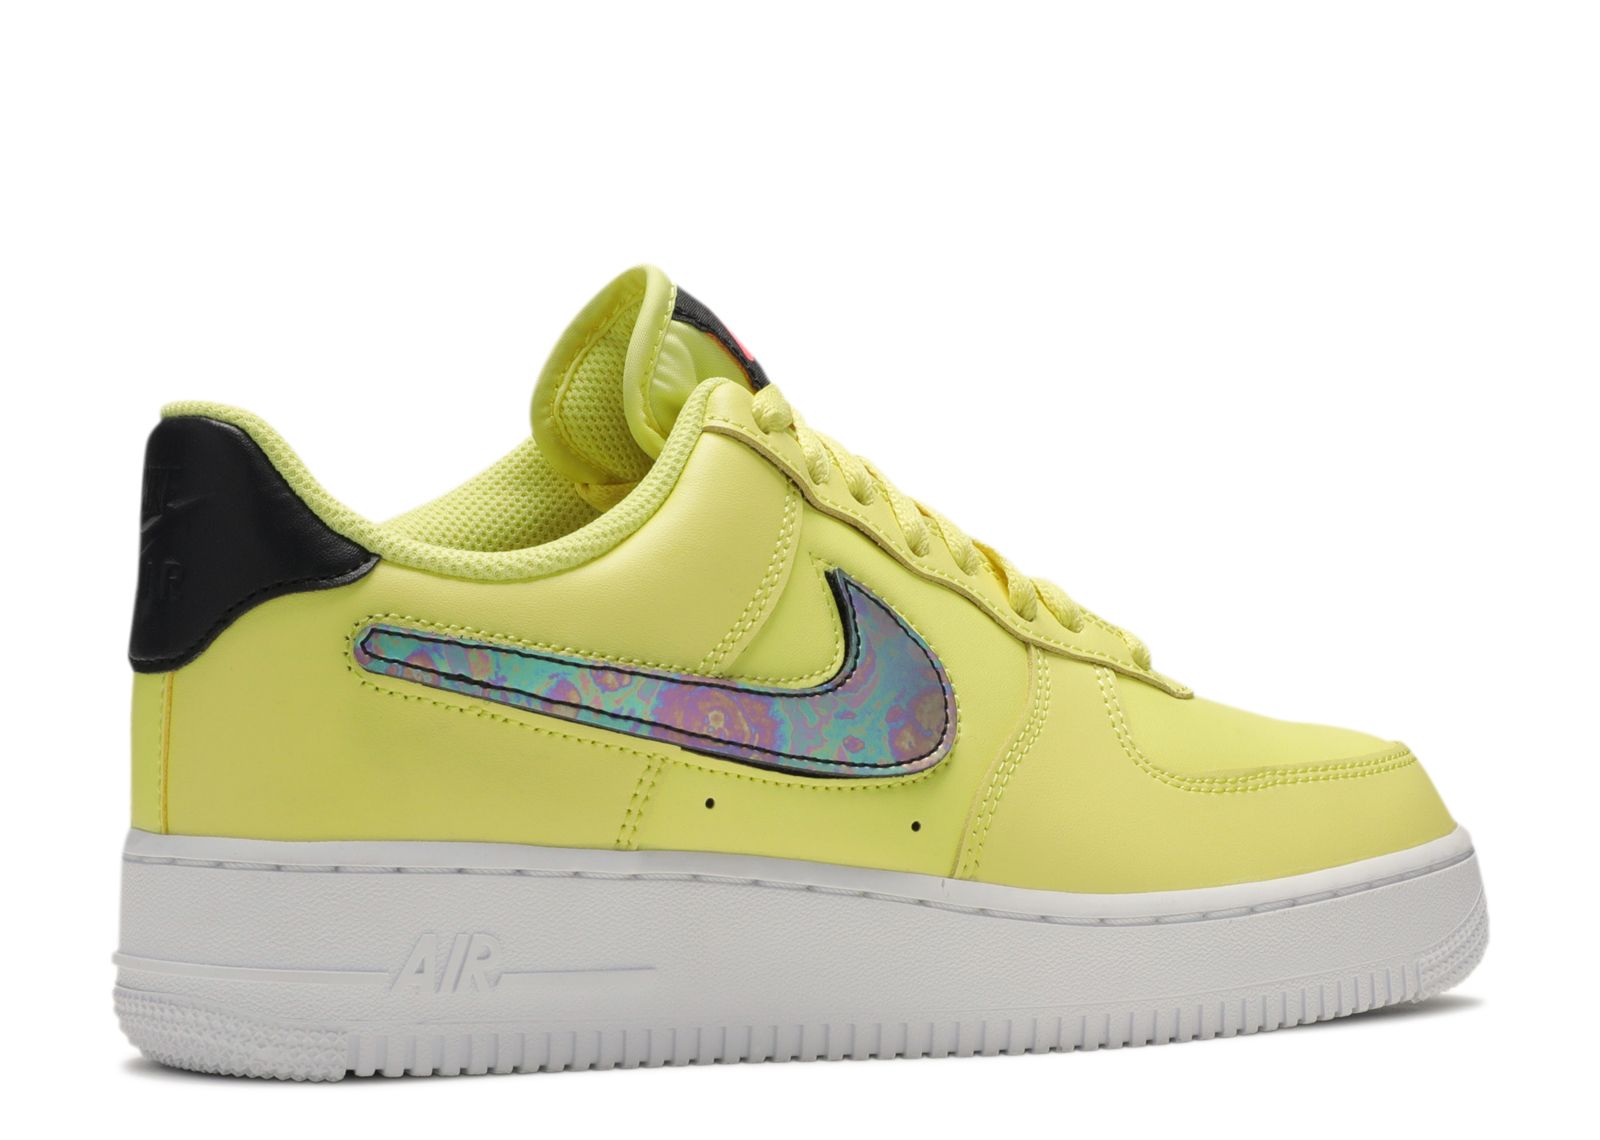 Nike Air Force 1 '07 LV8 3 Yellow Pulse Men's Basketball Shoes CI0067-700 